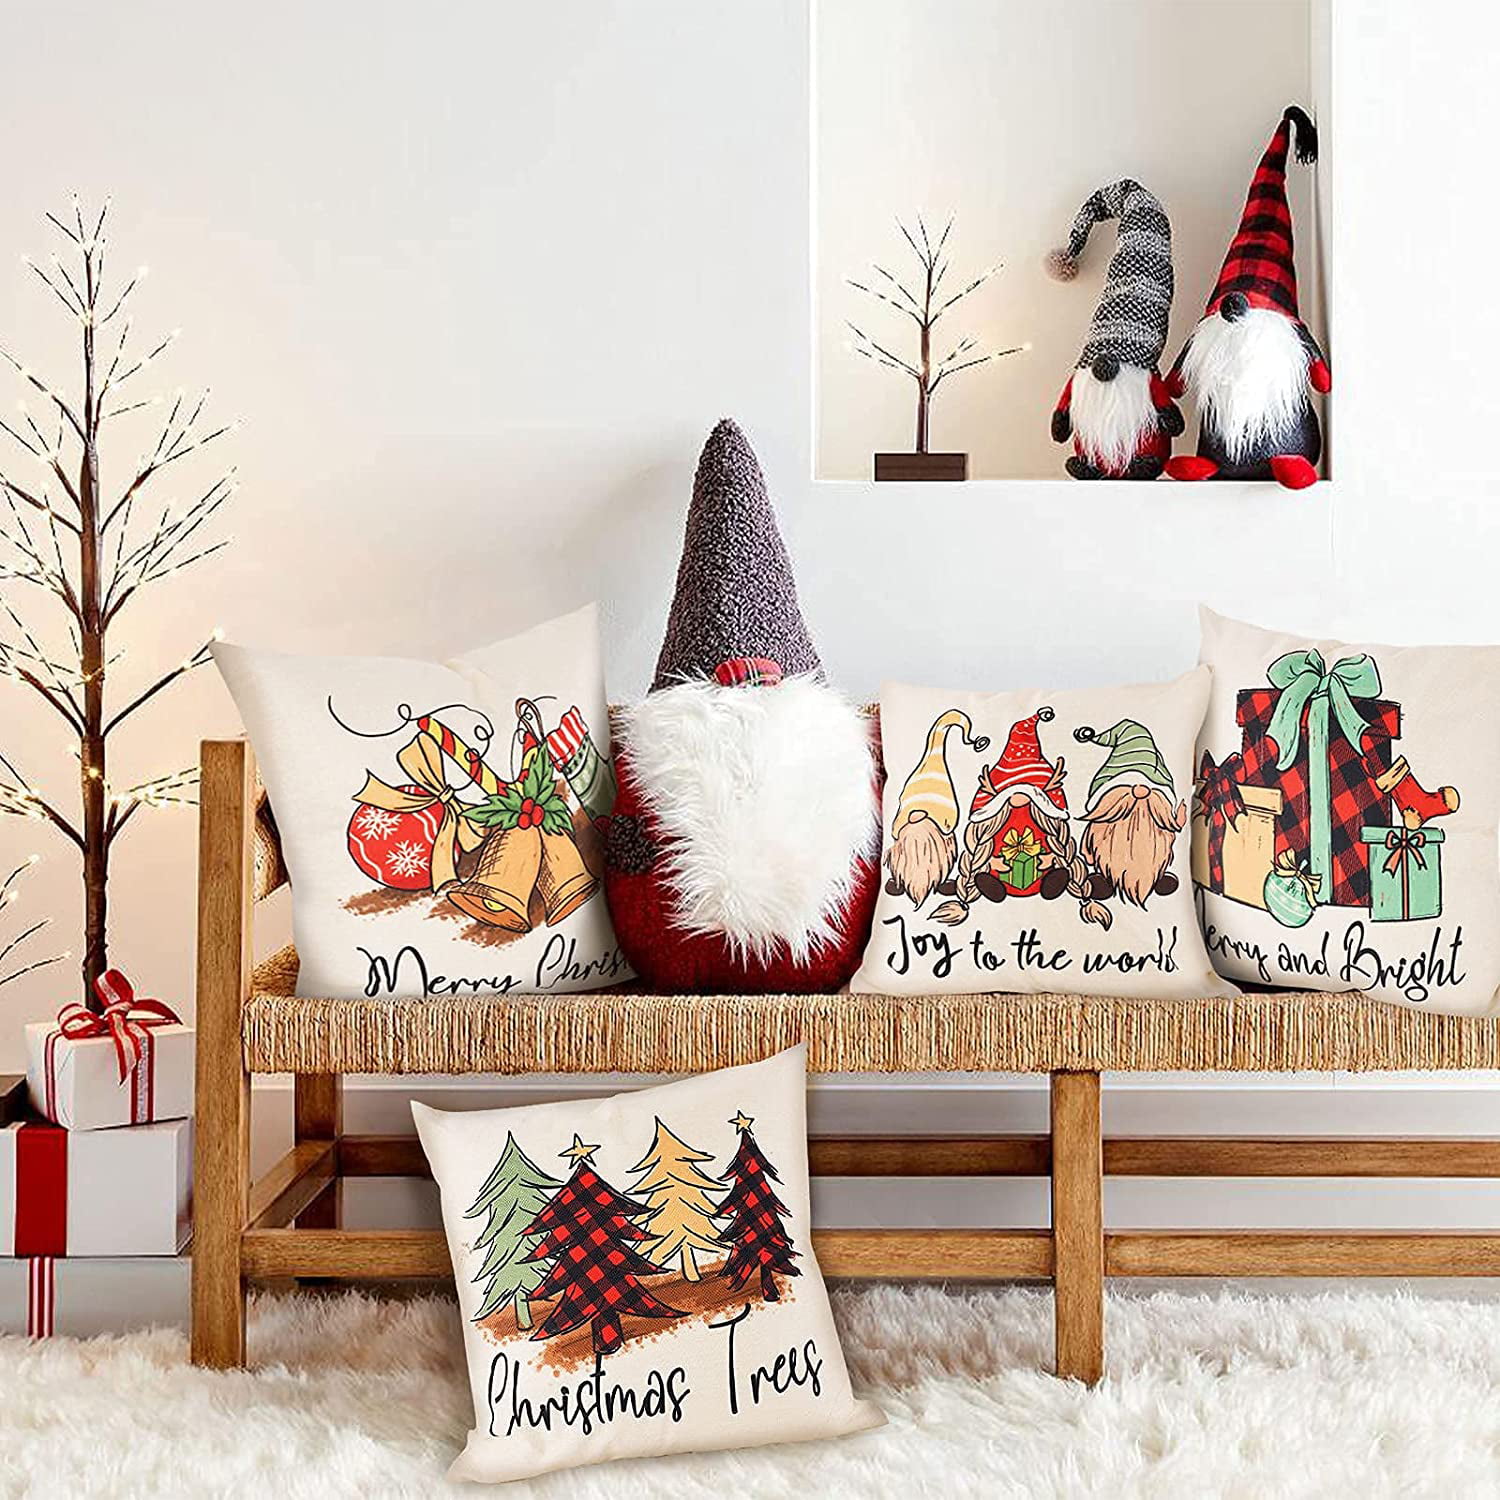  Outdoor Waterproof Pillows with Inserts 20x12In,Christmas Cute  Gnome with Xmas Tree Throw Pillow Cushion Case,Winter Snowflake on Blue  Decor Pillows for Patio Furniture Garden Balcony Couch Sofa : Patio, Lawn 